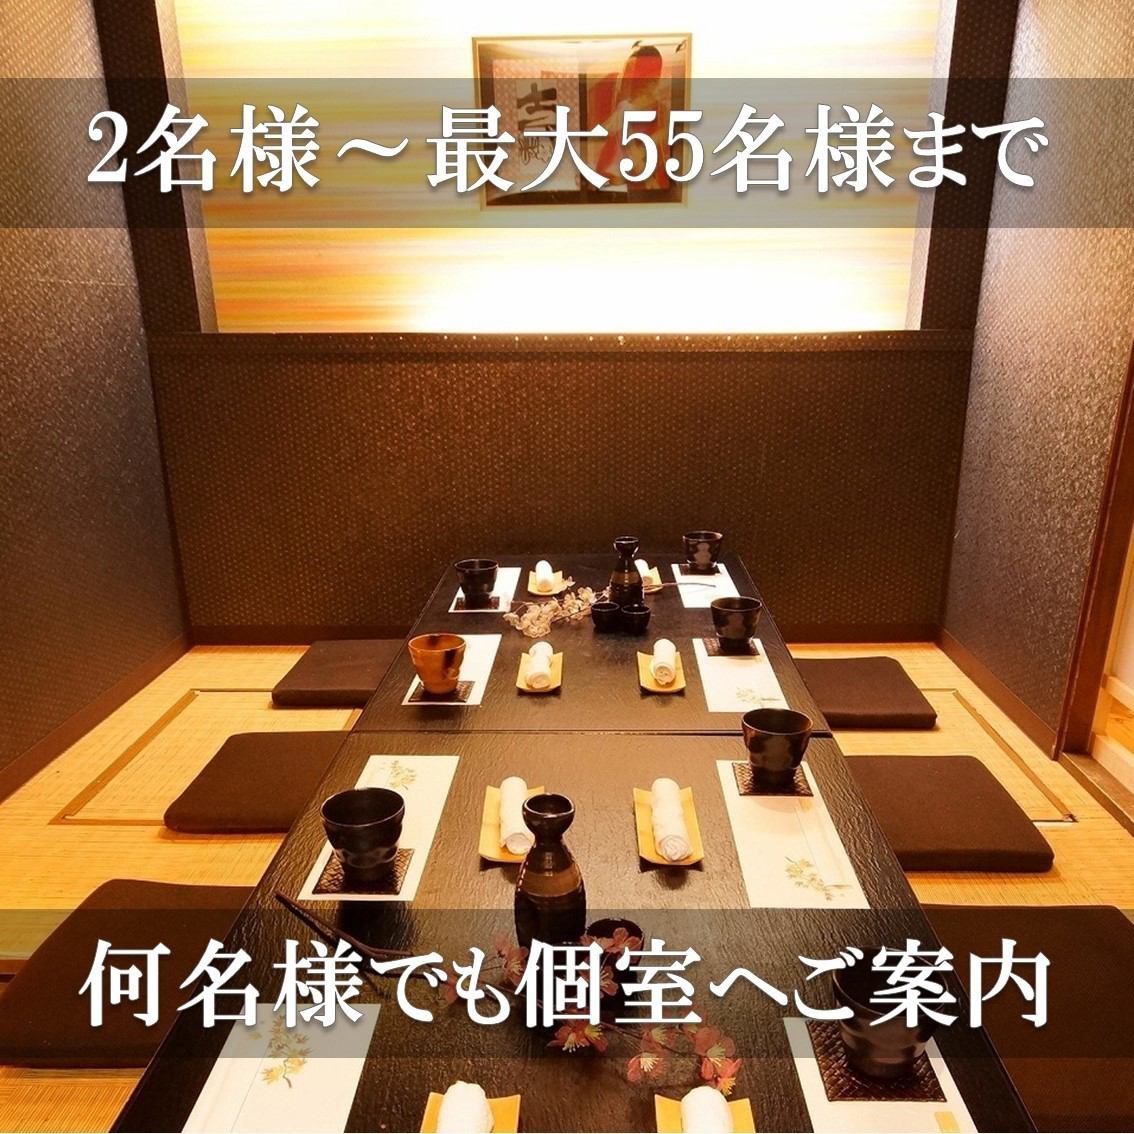 [Directly connected to Fujieda Station/completely private room] Available from 3,500 yen including 3 hours of all-you-can-drink!